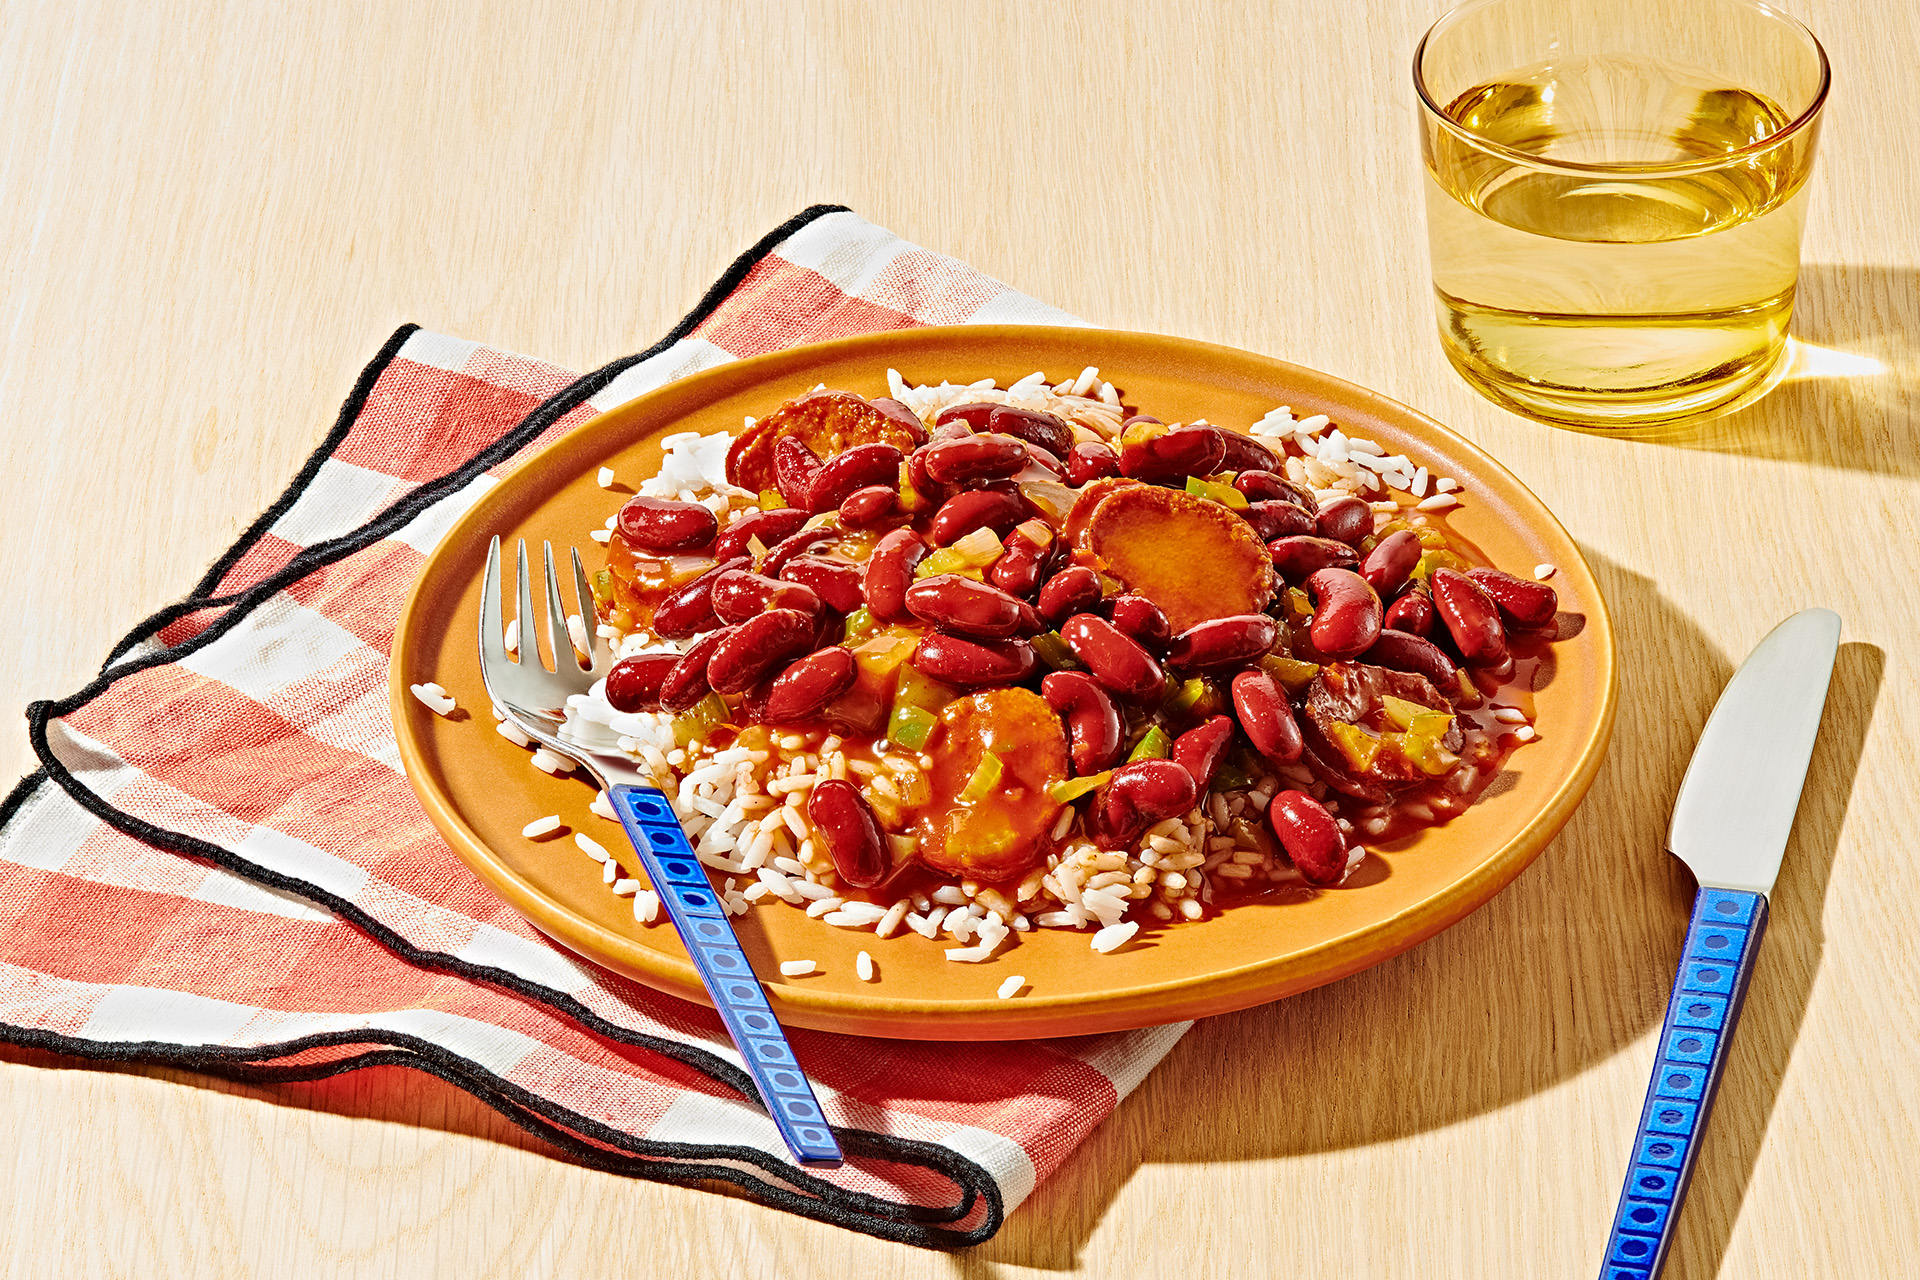 Red beans and rice with vegetables on a mustard colored plate with fork, knife, and a glass of water